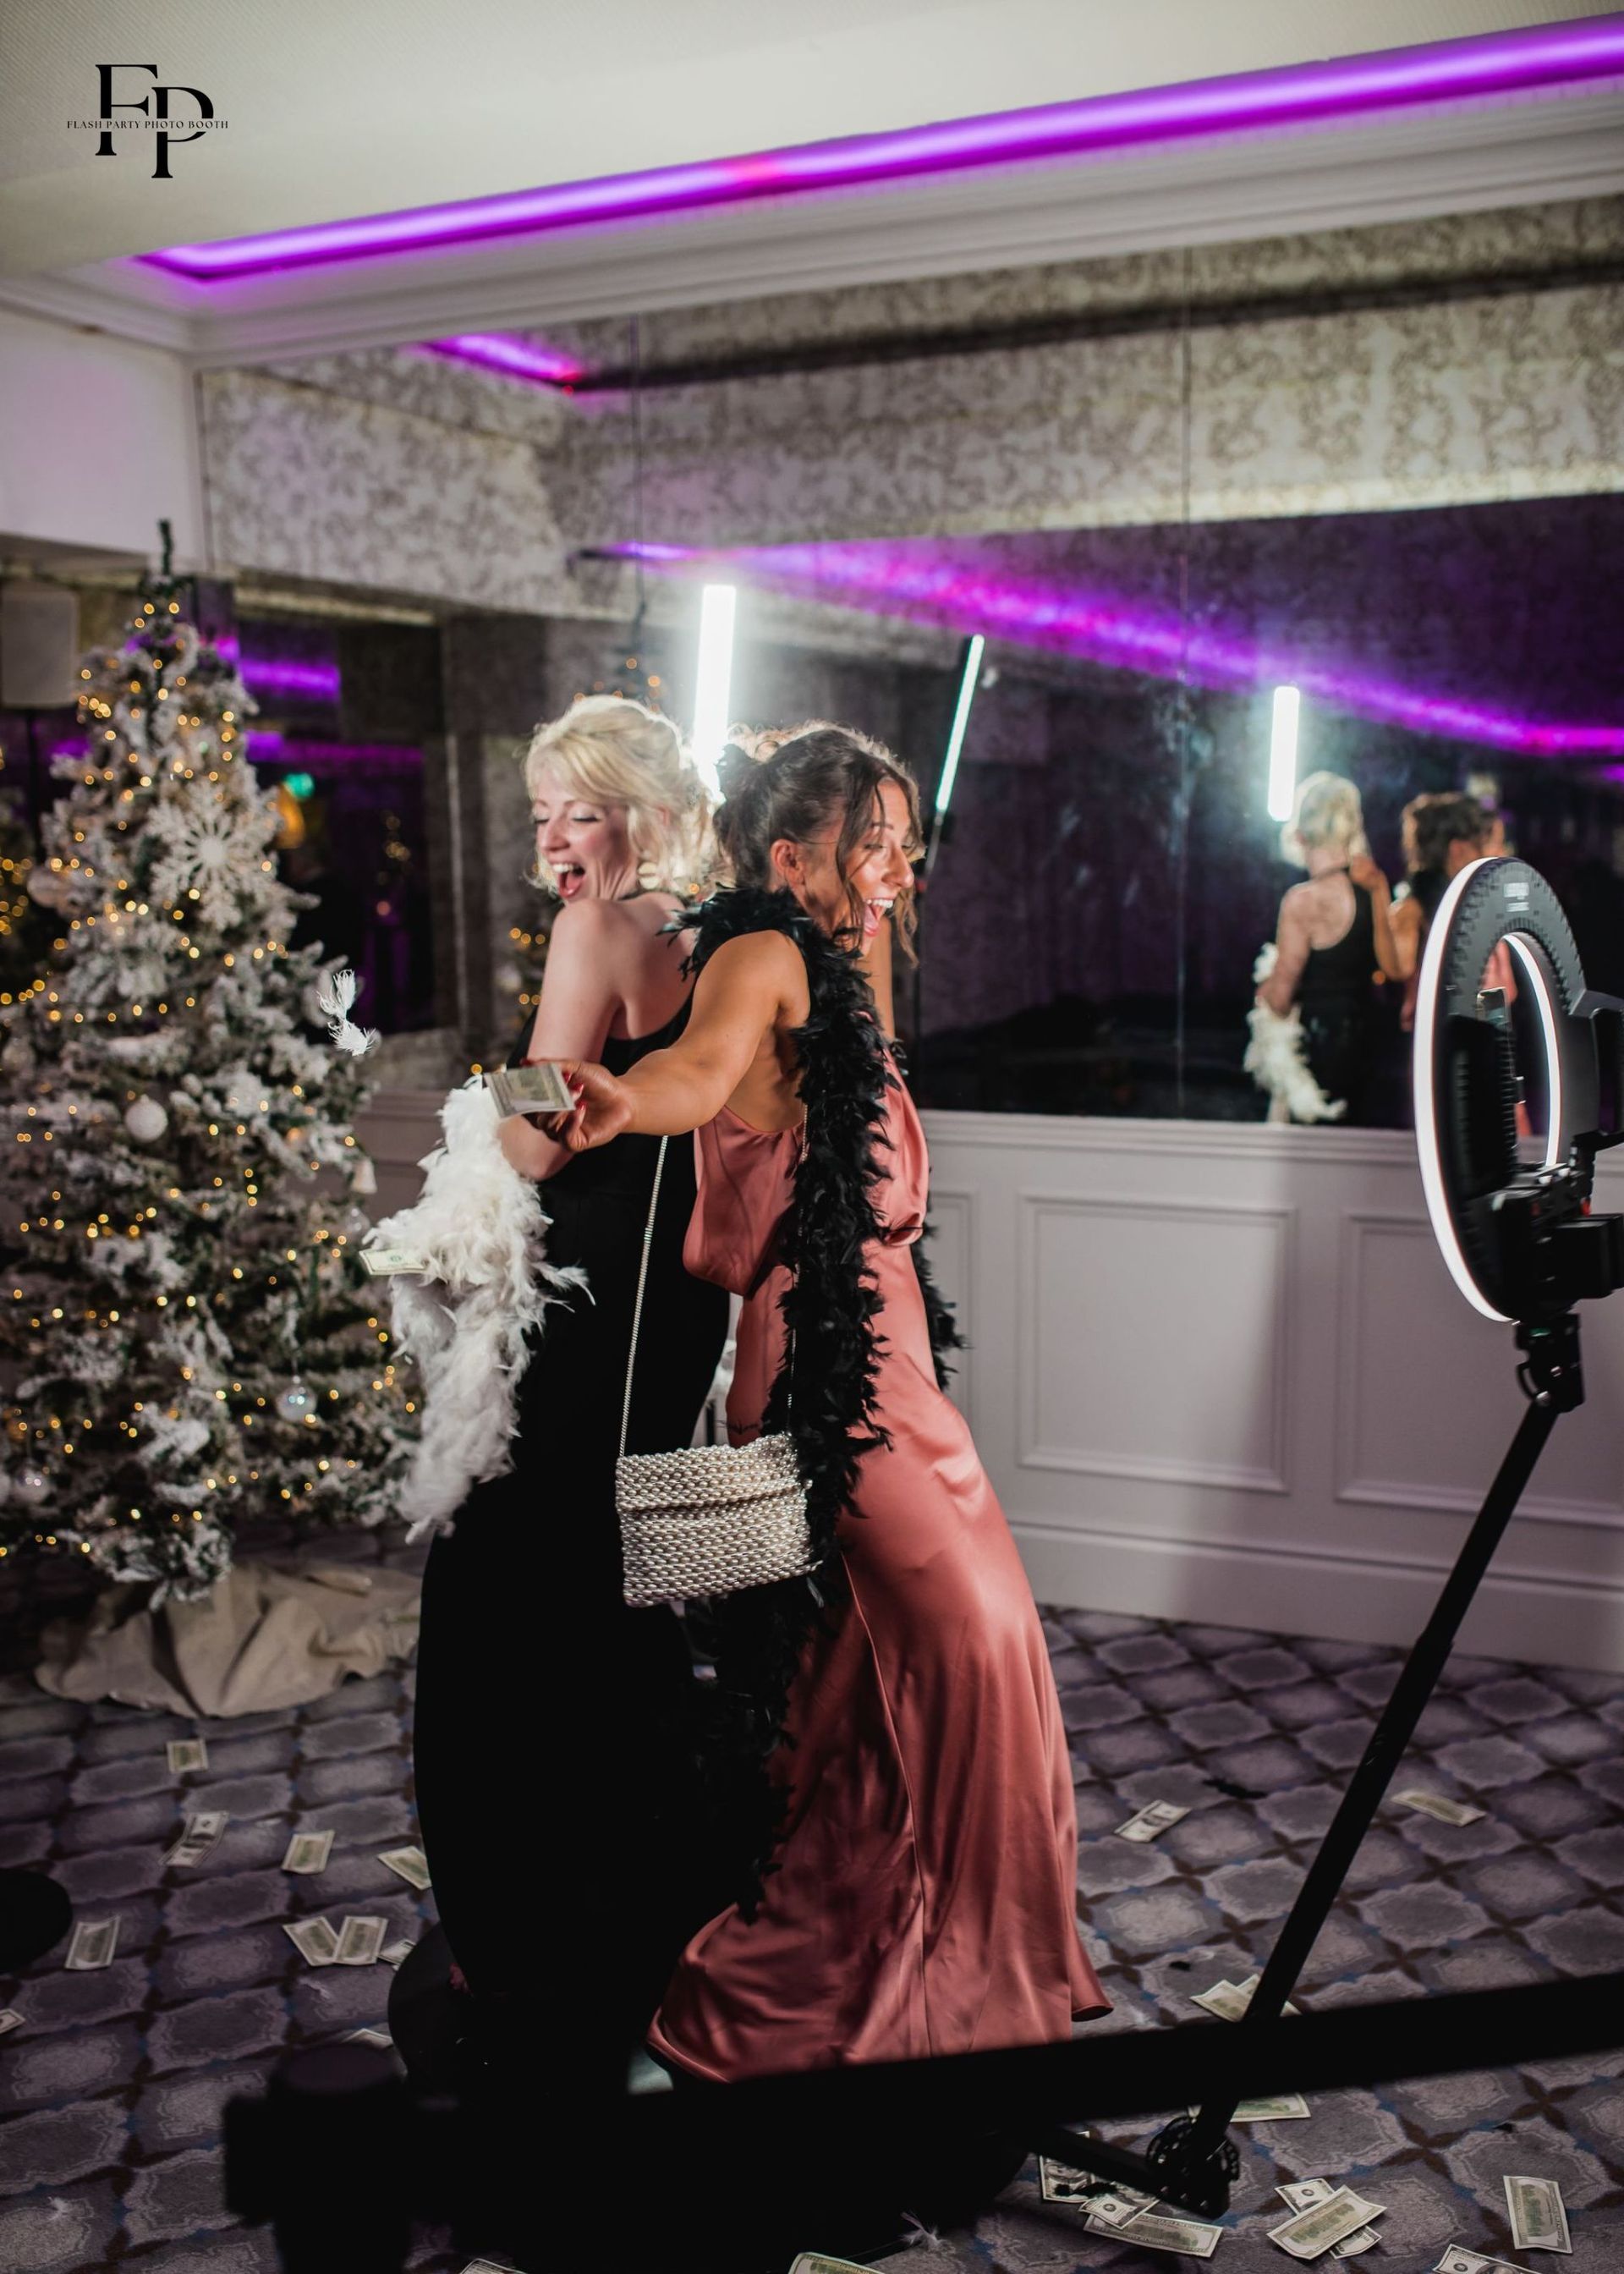 Two women in fancy gowns posing by a festive Christmas tree in front of 360 Photo Booth.